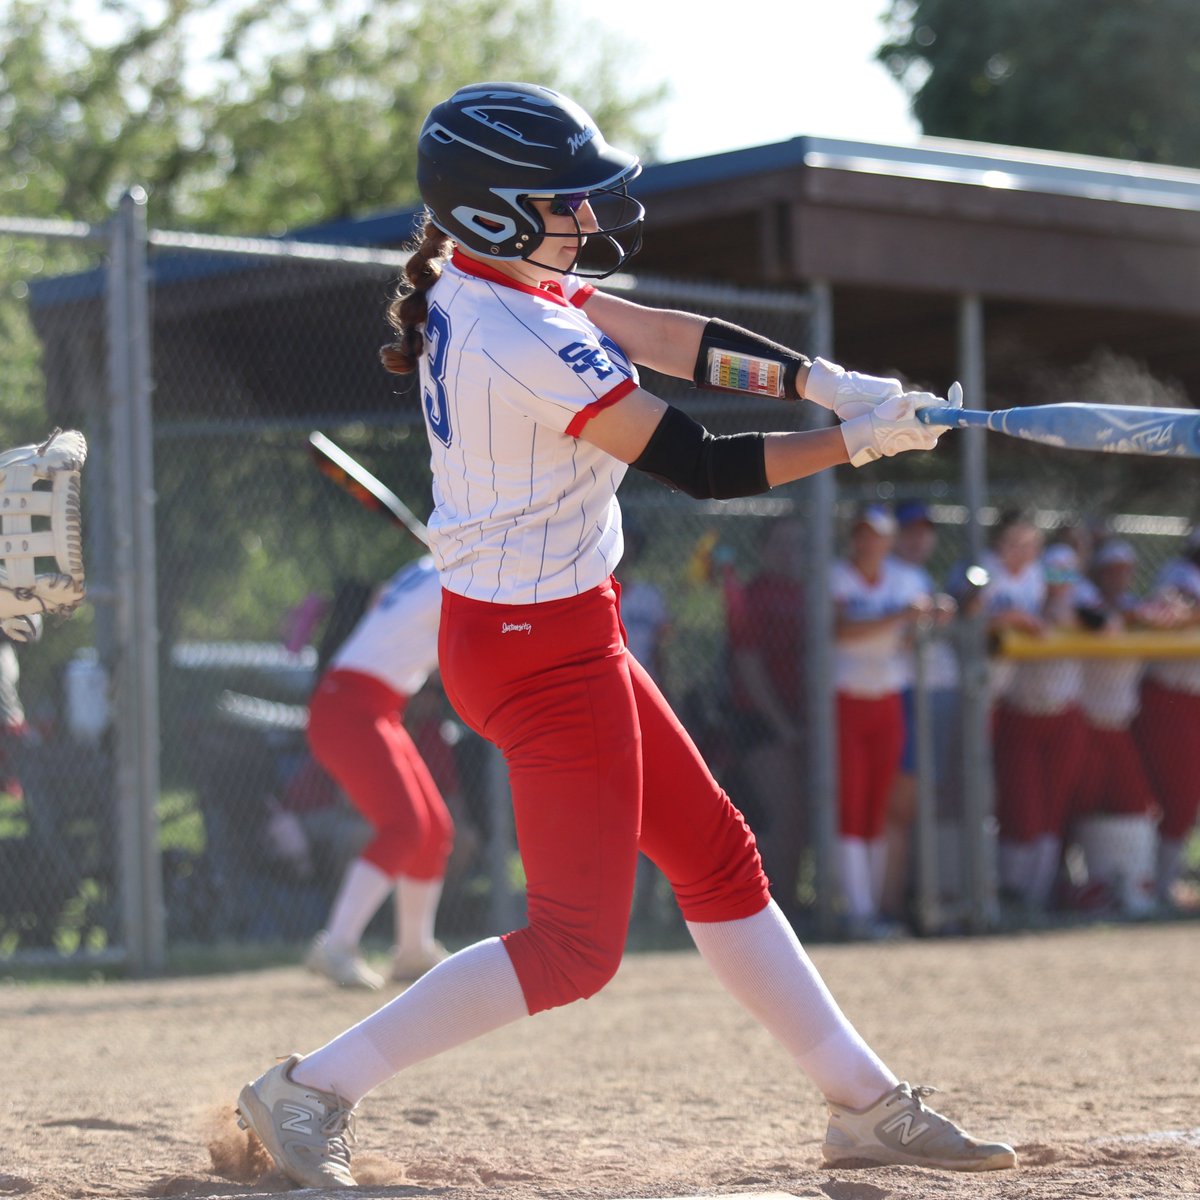 See some of the pictures from the Softball game against SB Clay. The entire gallery can be seen at johnadamsathletics.com/photos 
🥎🦅🔴⚪️🔵📸🥎